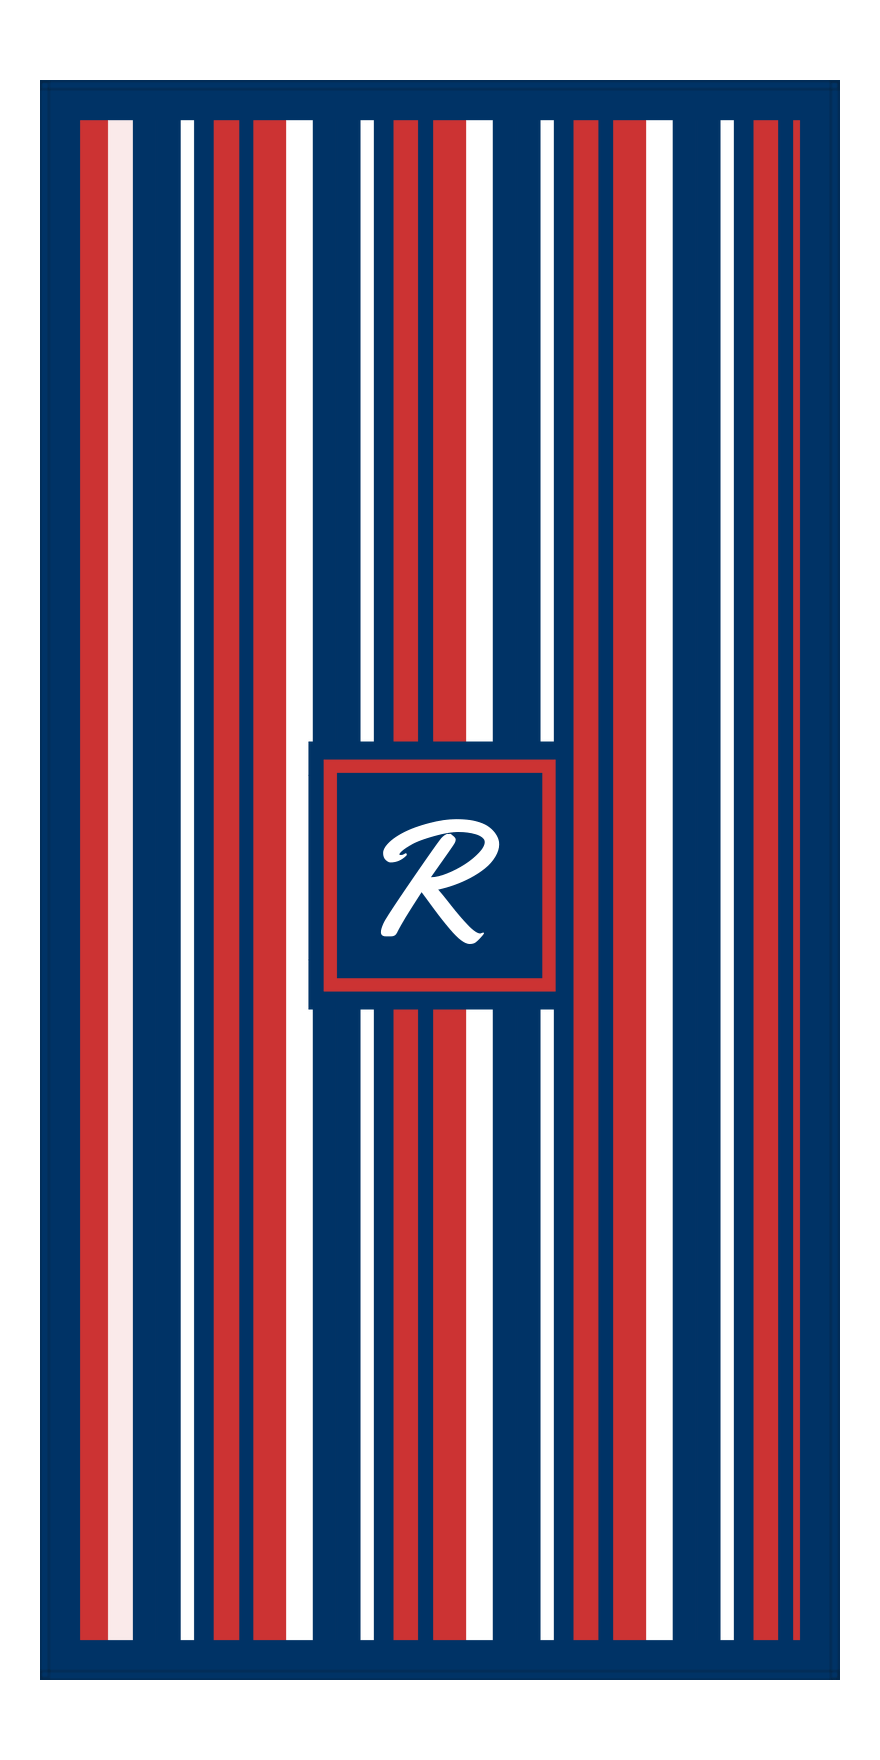 Personalized 5 Color Stripes 4 Repeat Beach Towel - Vertical - Red White and Blue - Square Frame - Front View